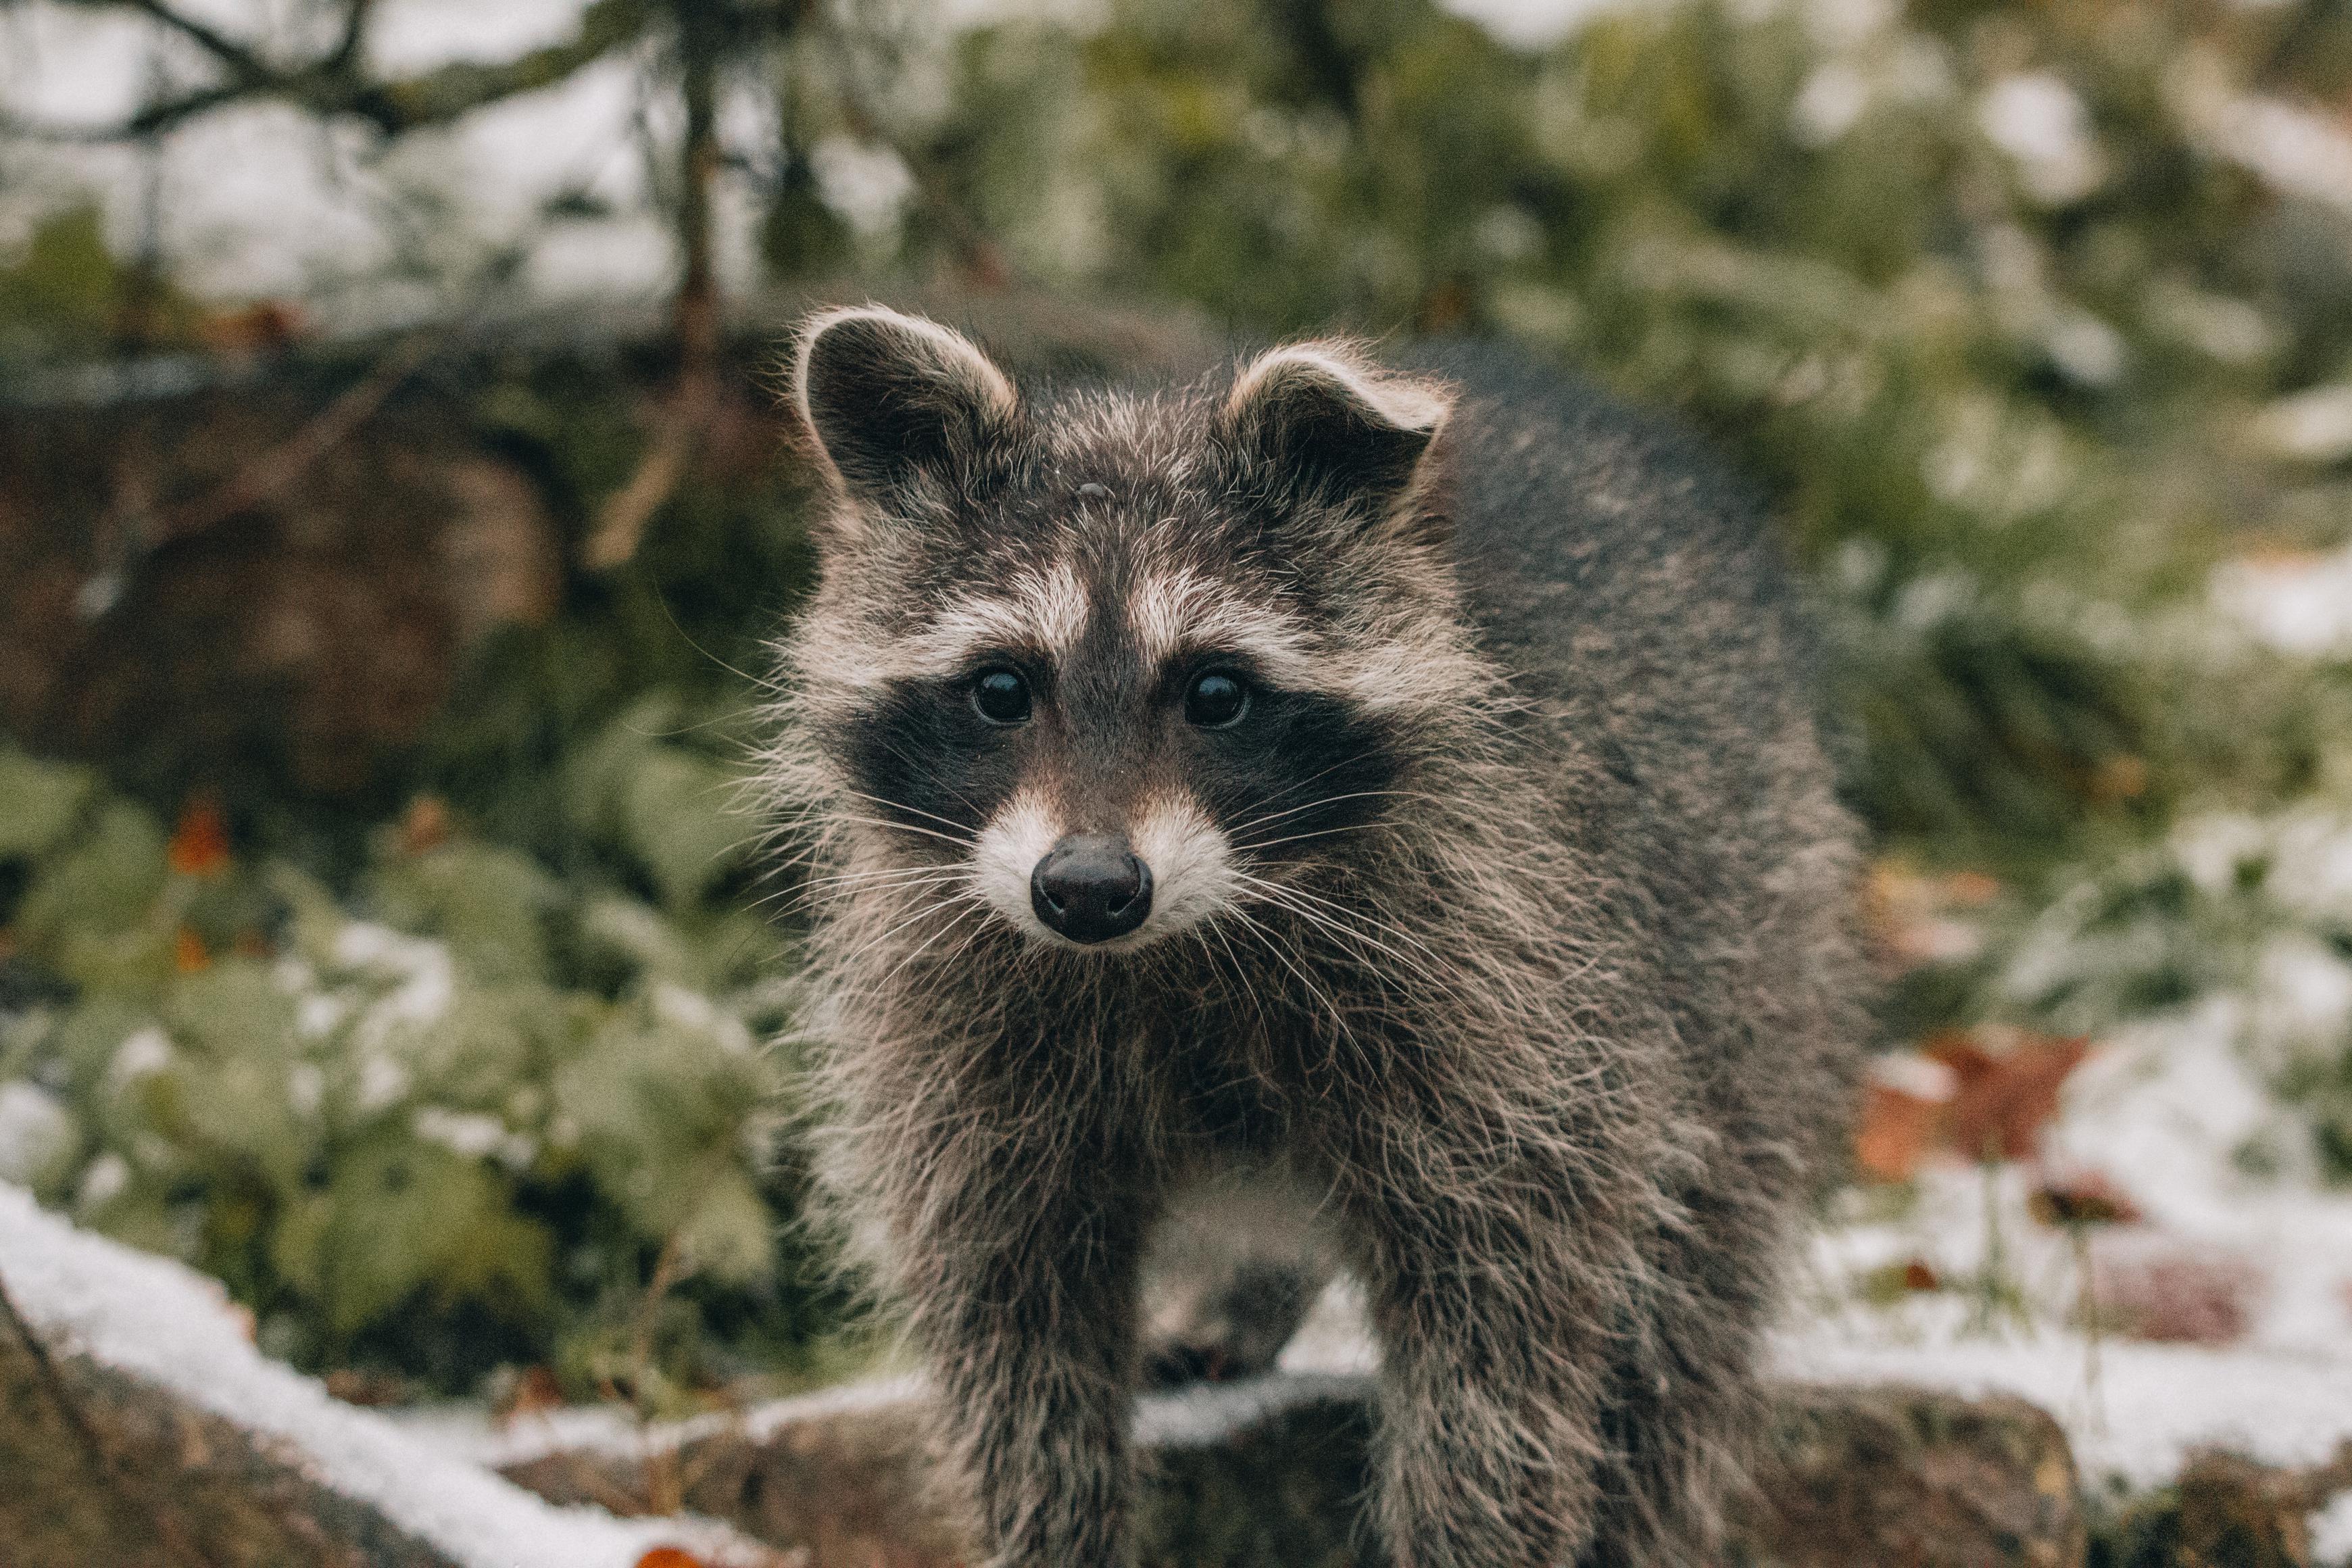 Biology of raccoons: what are the physical adaptations of raccoons that help them survive in cold climates